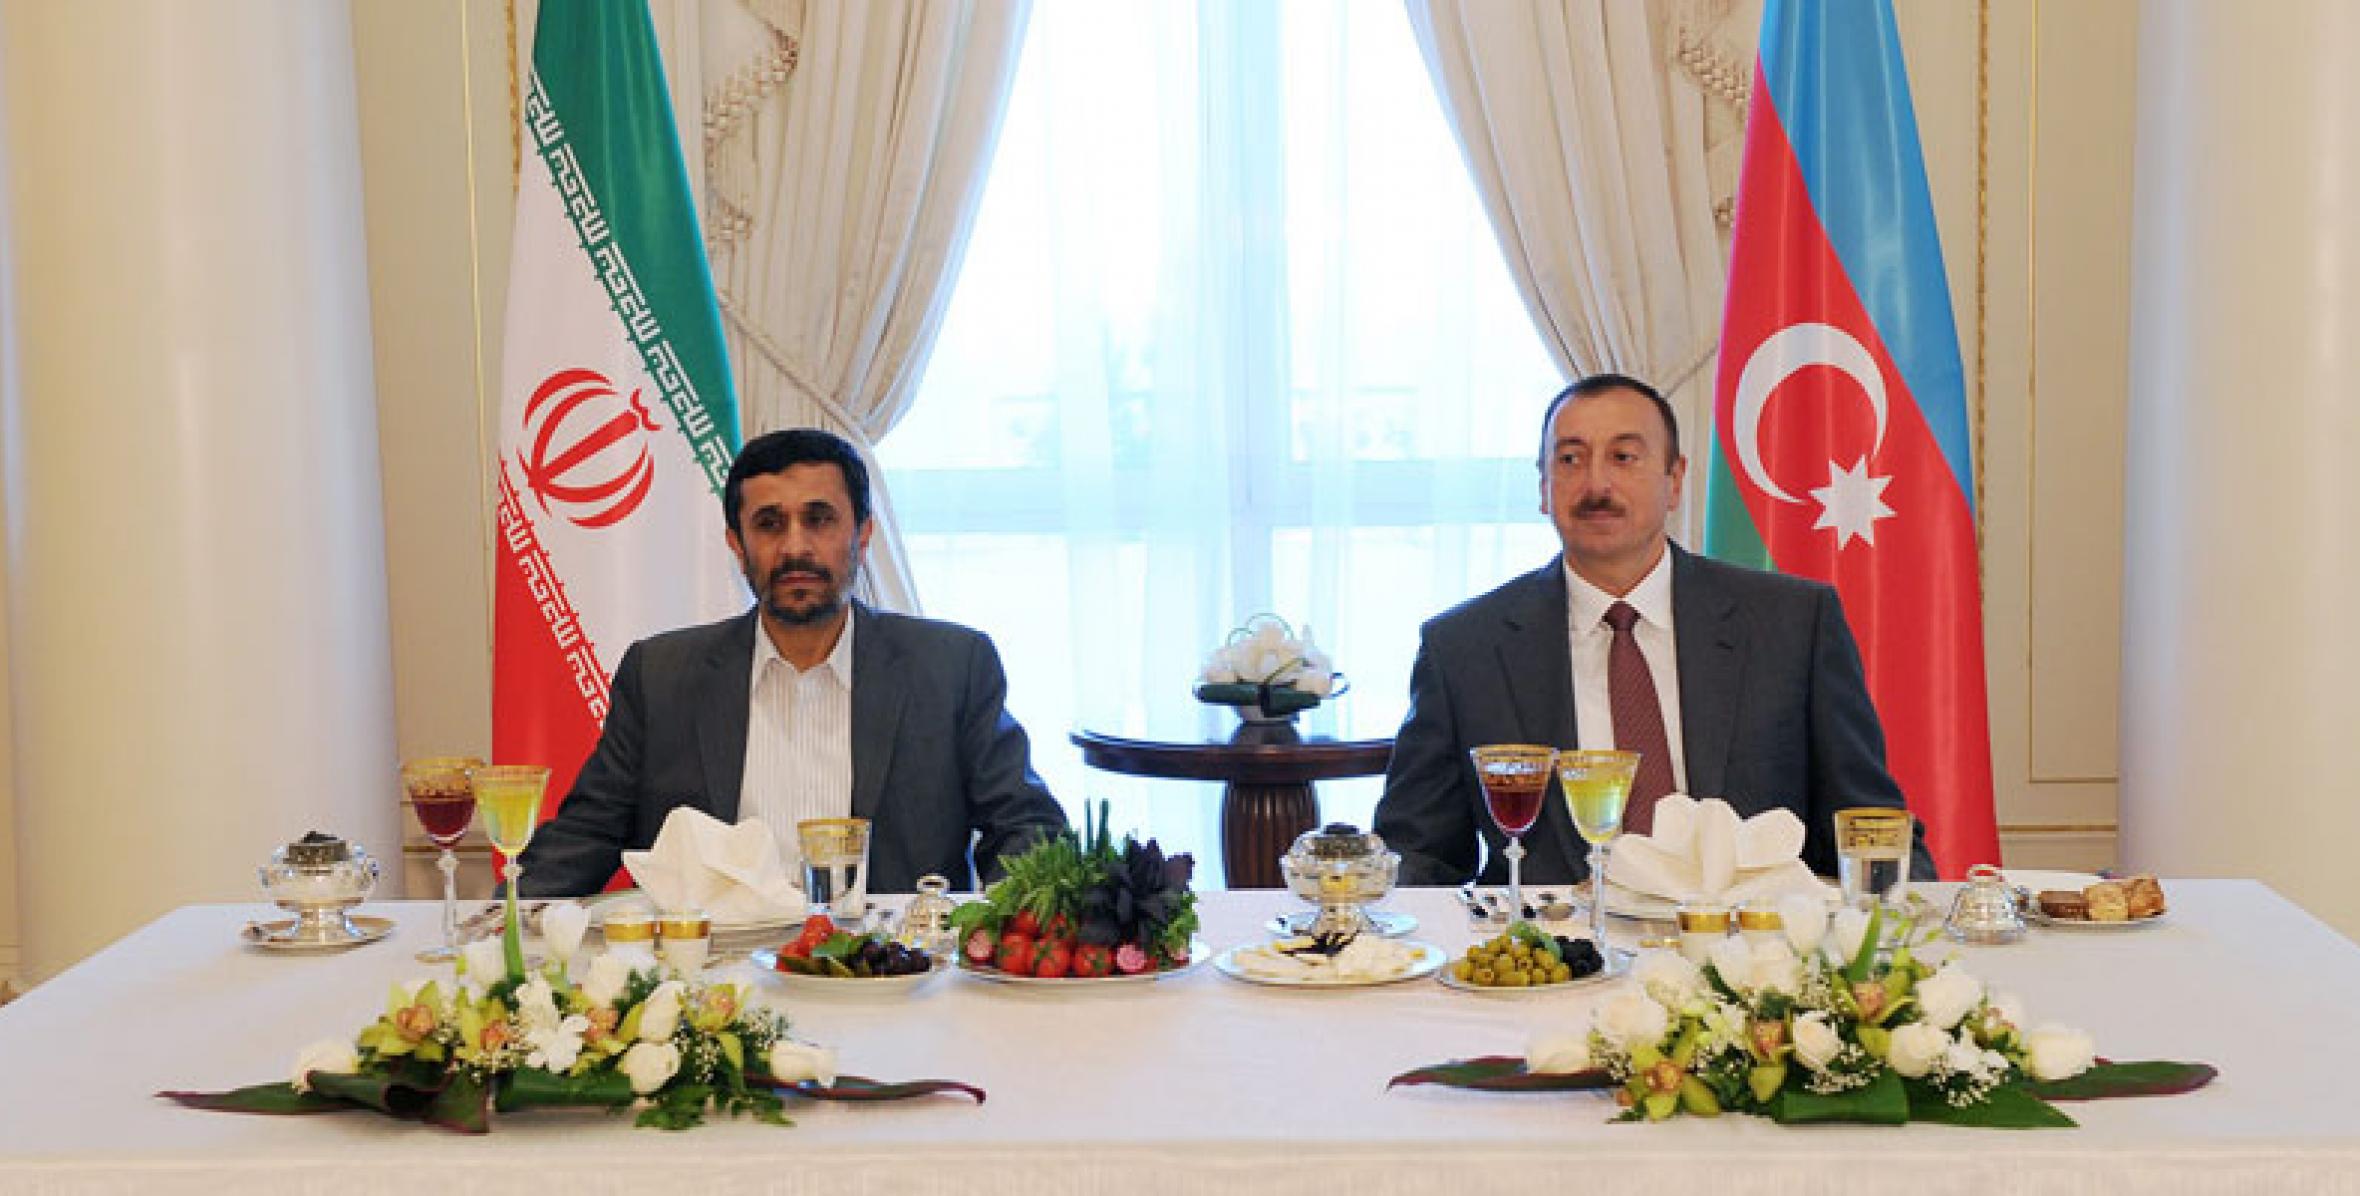 Official reception was offered by Ilham Aliyev in honor of Mahmoud Ahmadinejad, the President of Iran